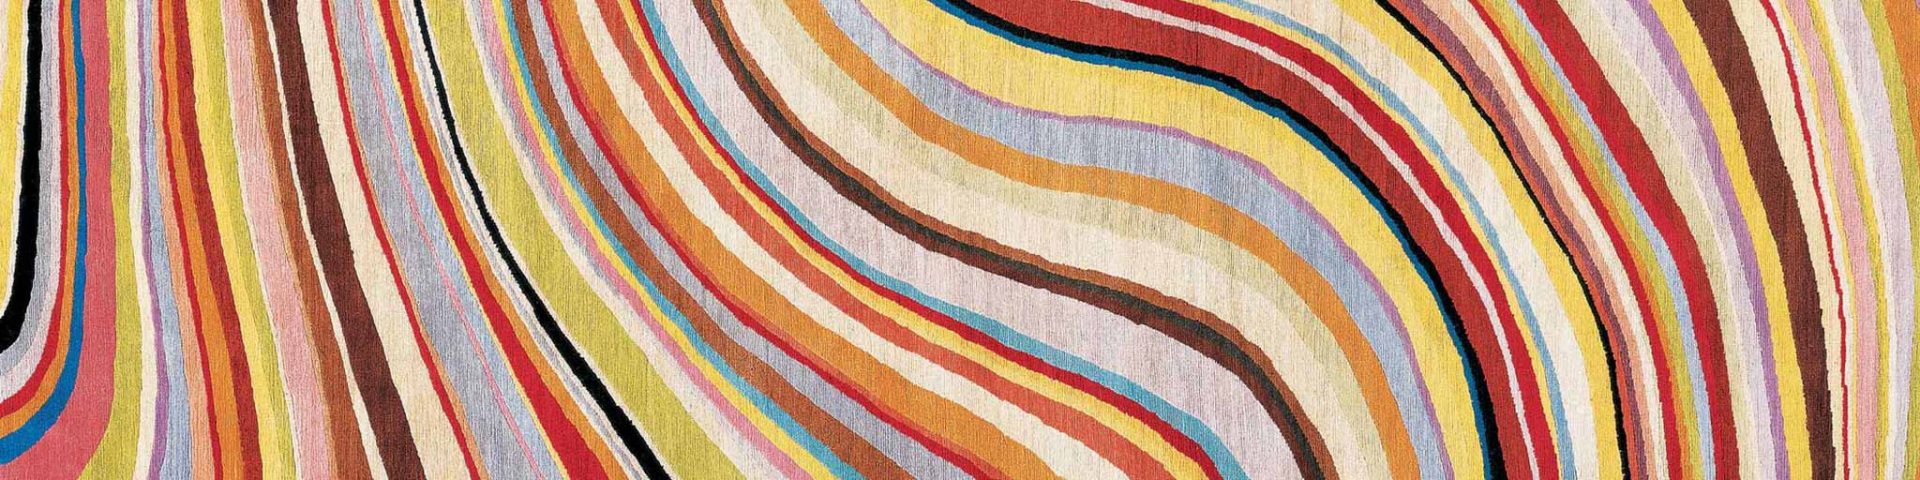 I want a Knockoff | Paul Smith Swirl Rug - The Ruggist